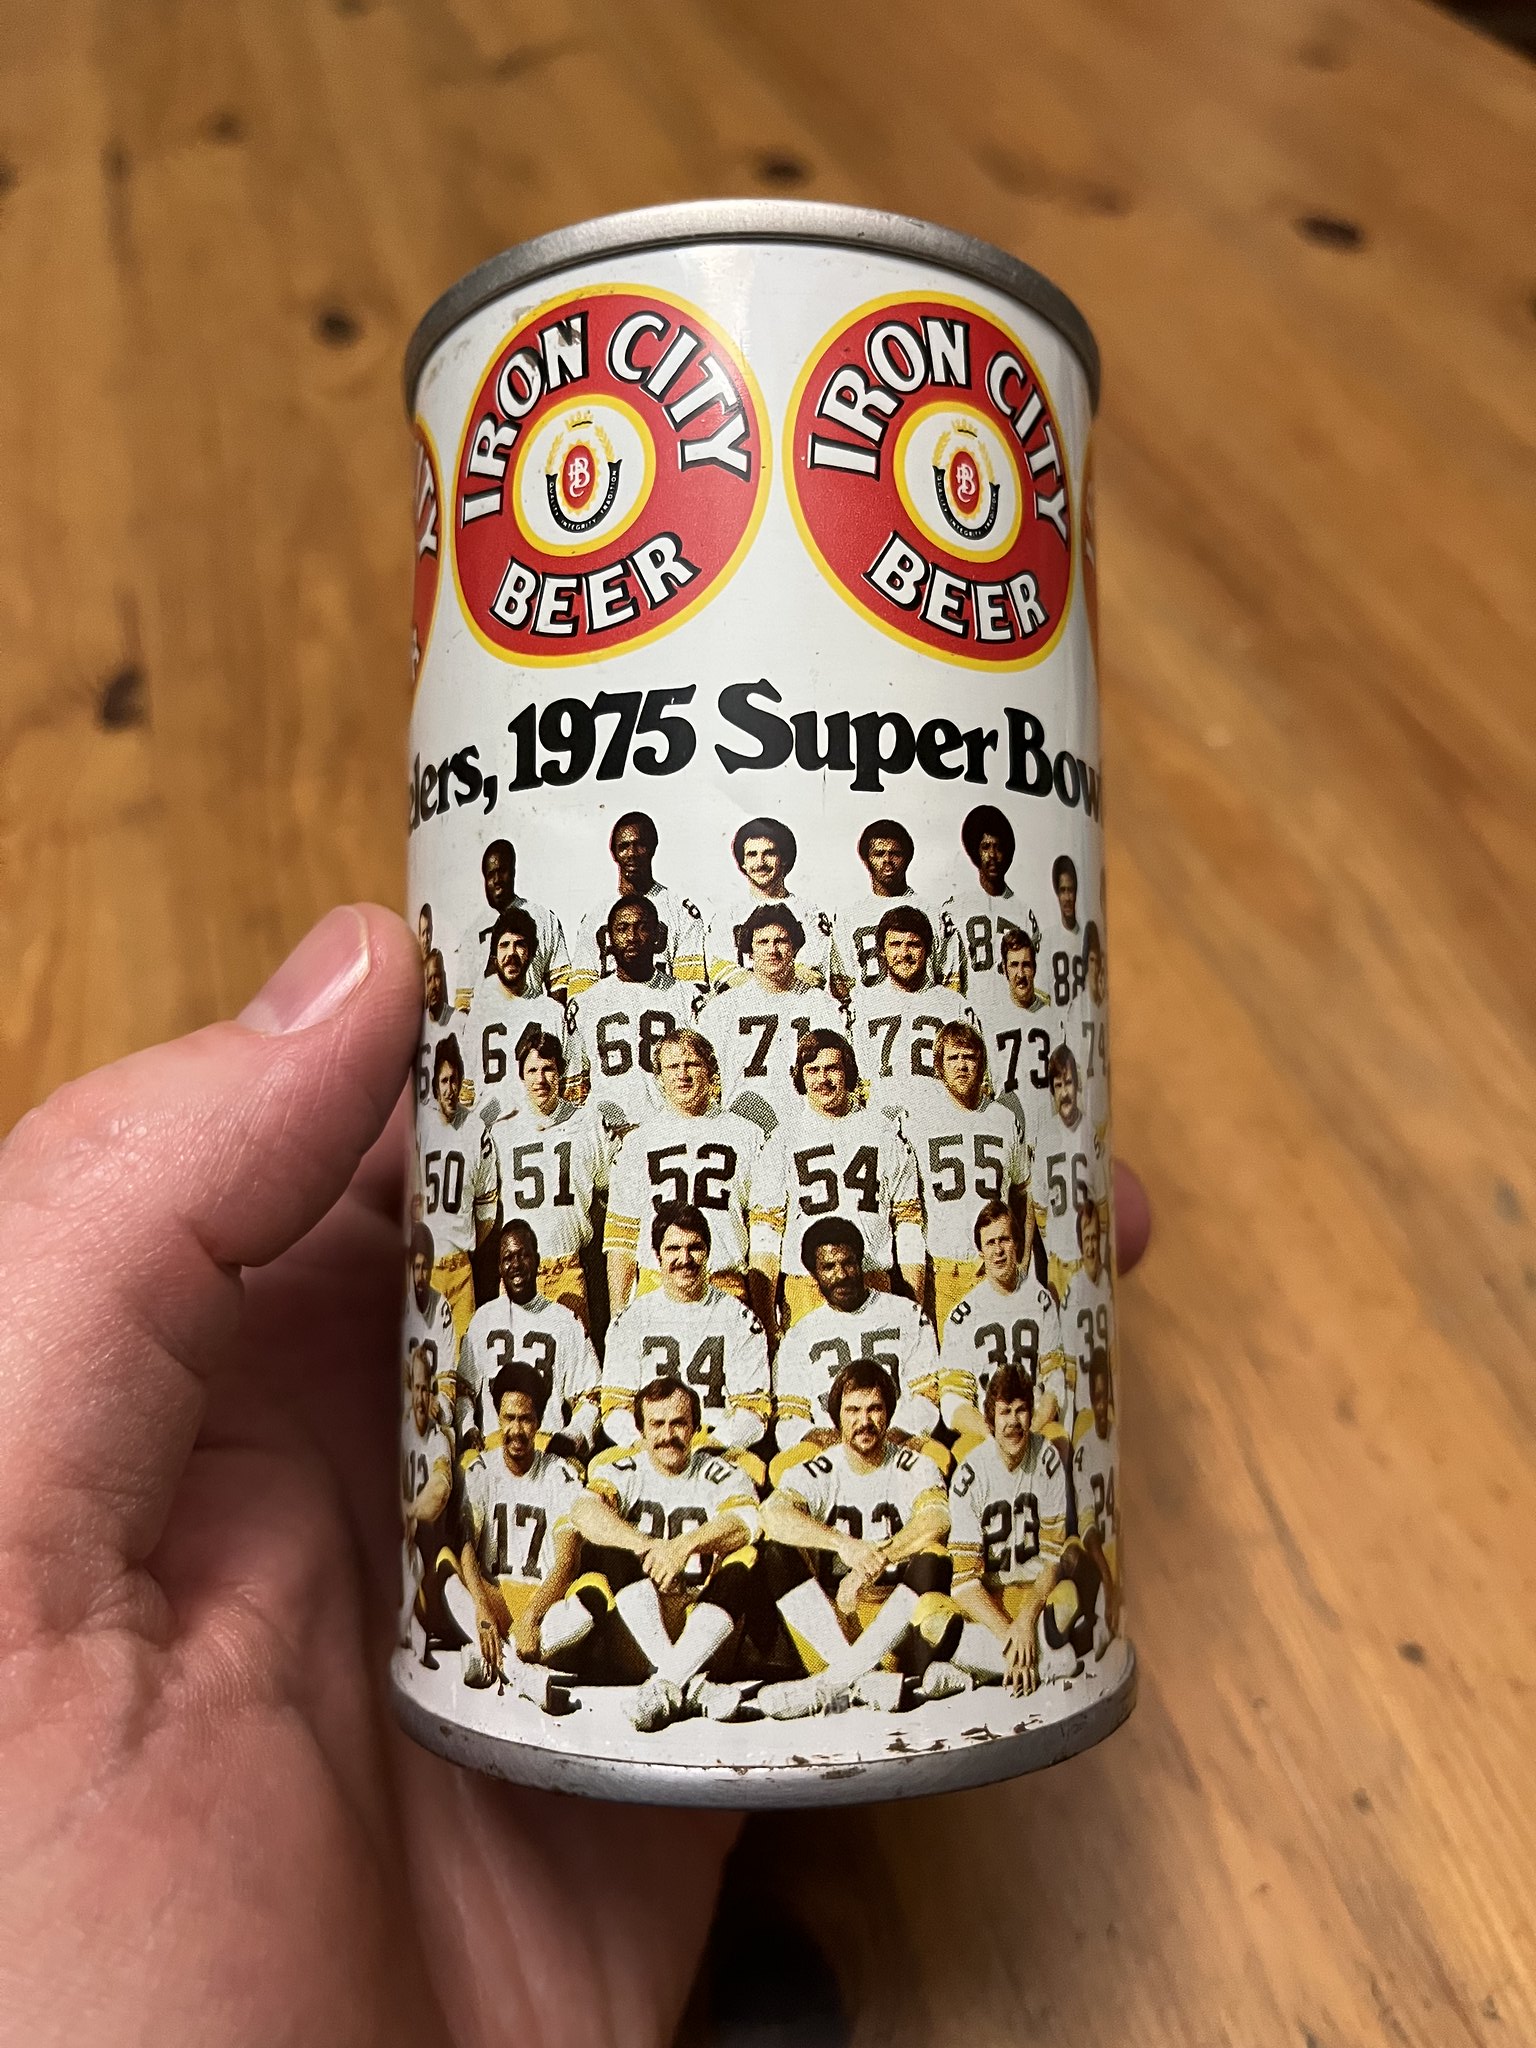 Iron City Beer can